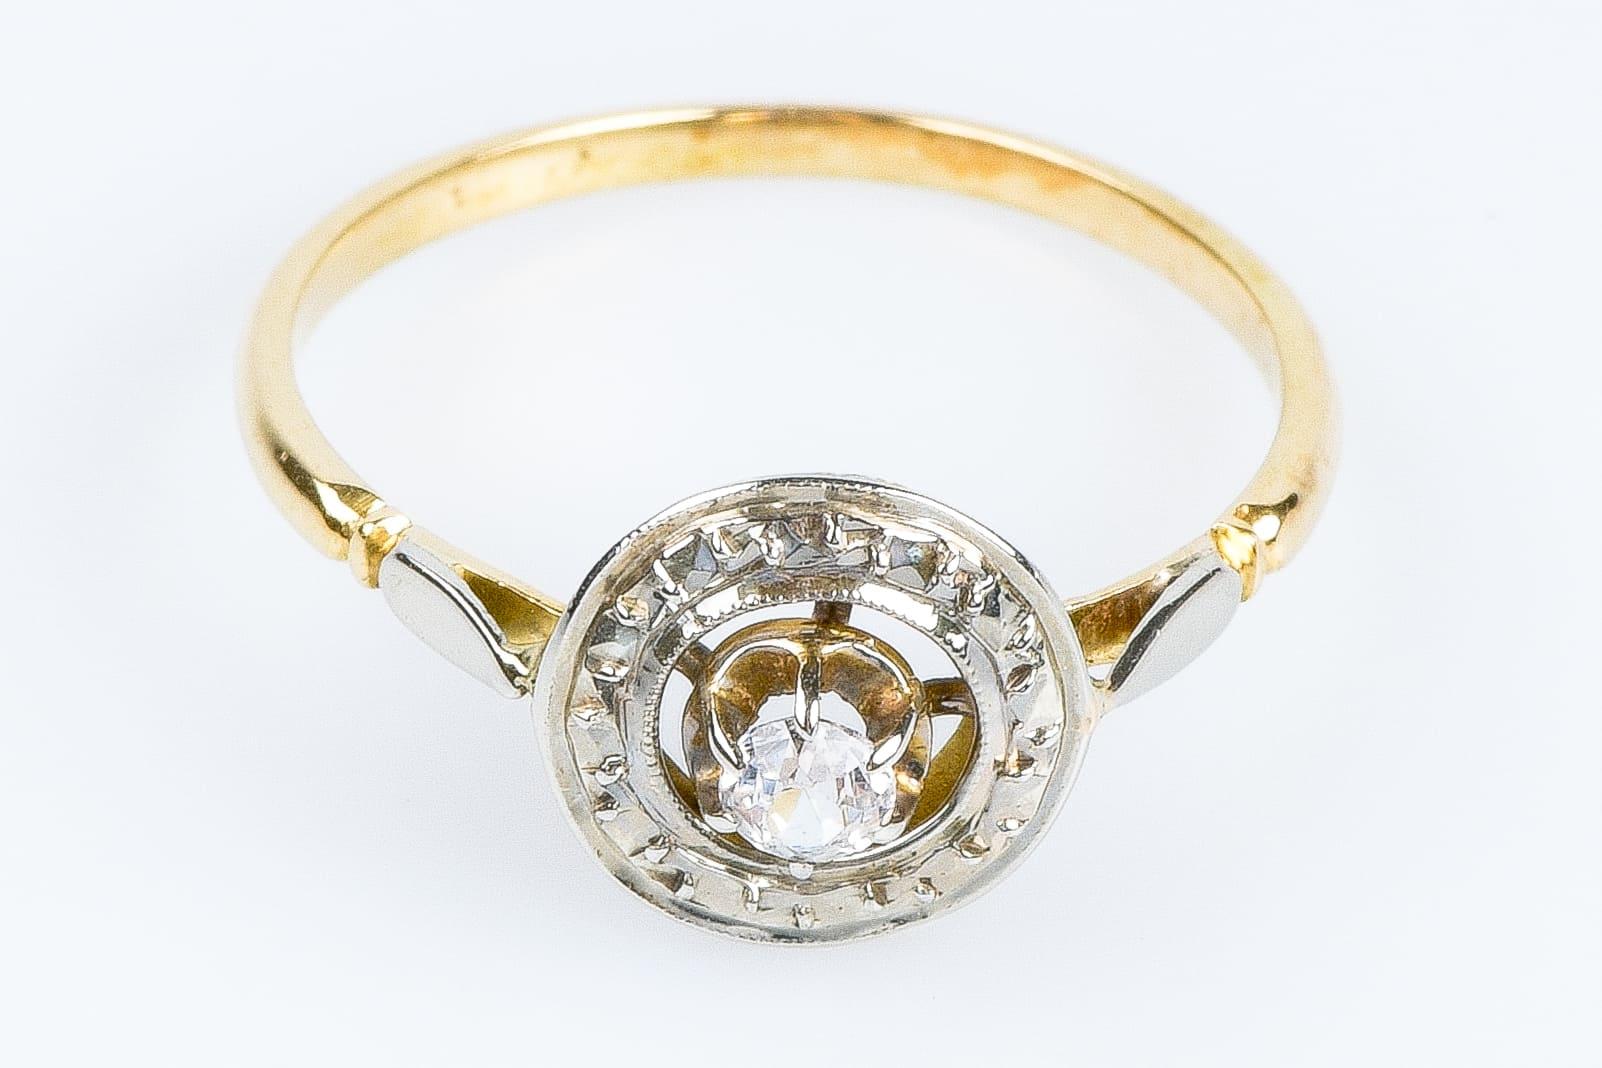 Antique 18-carat yellow gold ring decorated with zirconium oxide For Sale 3